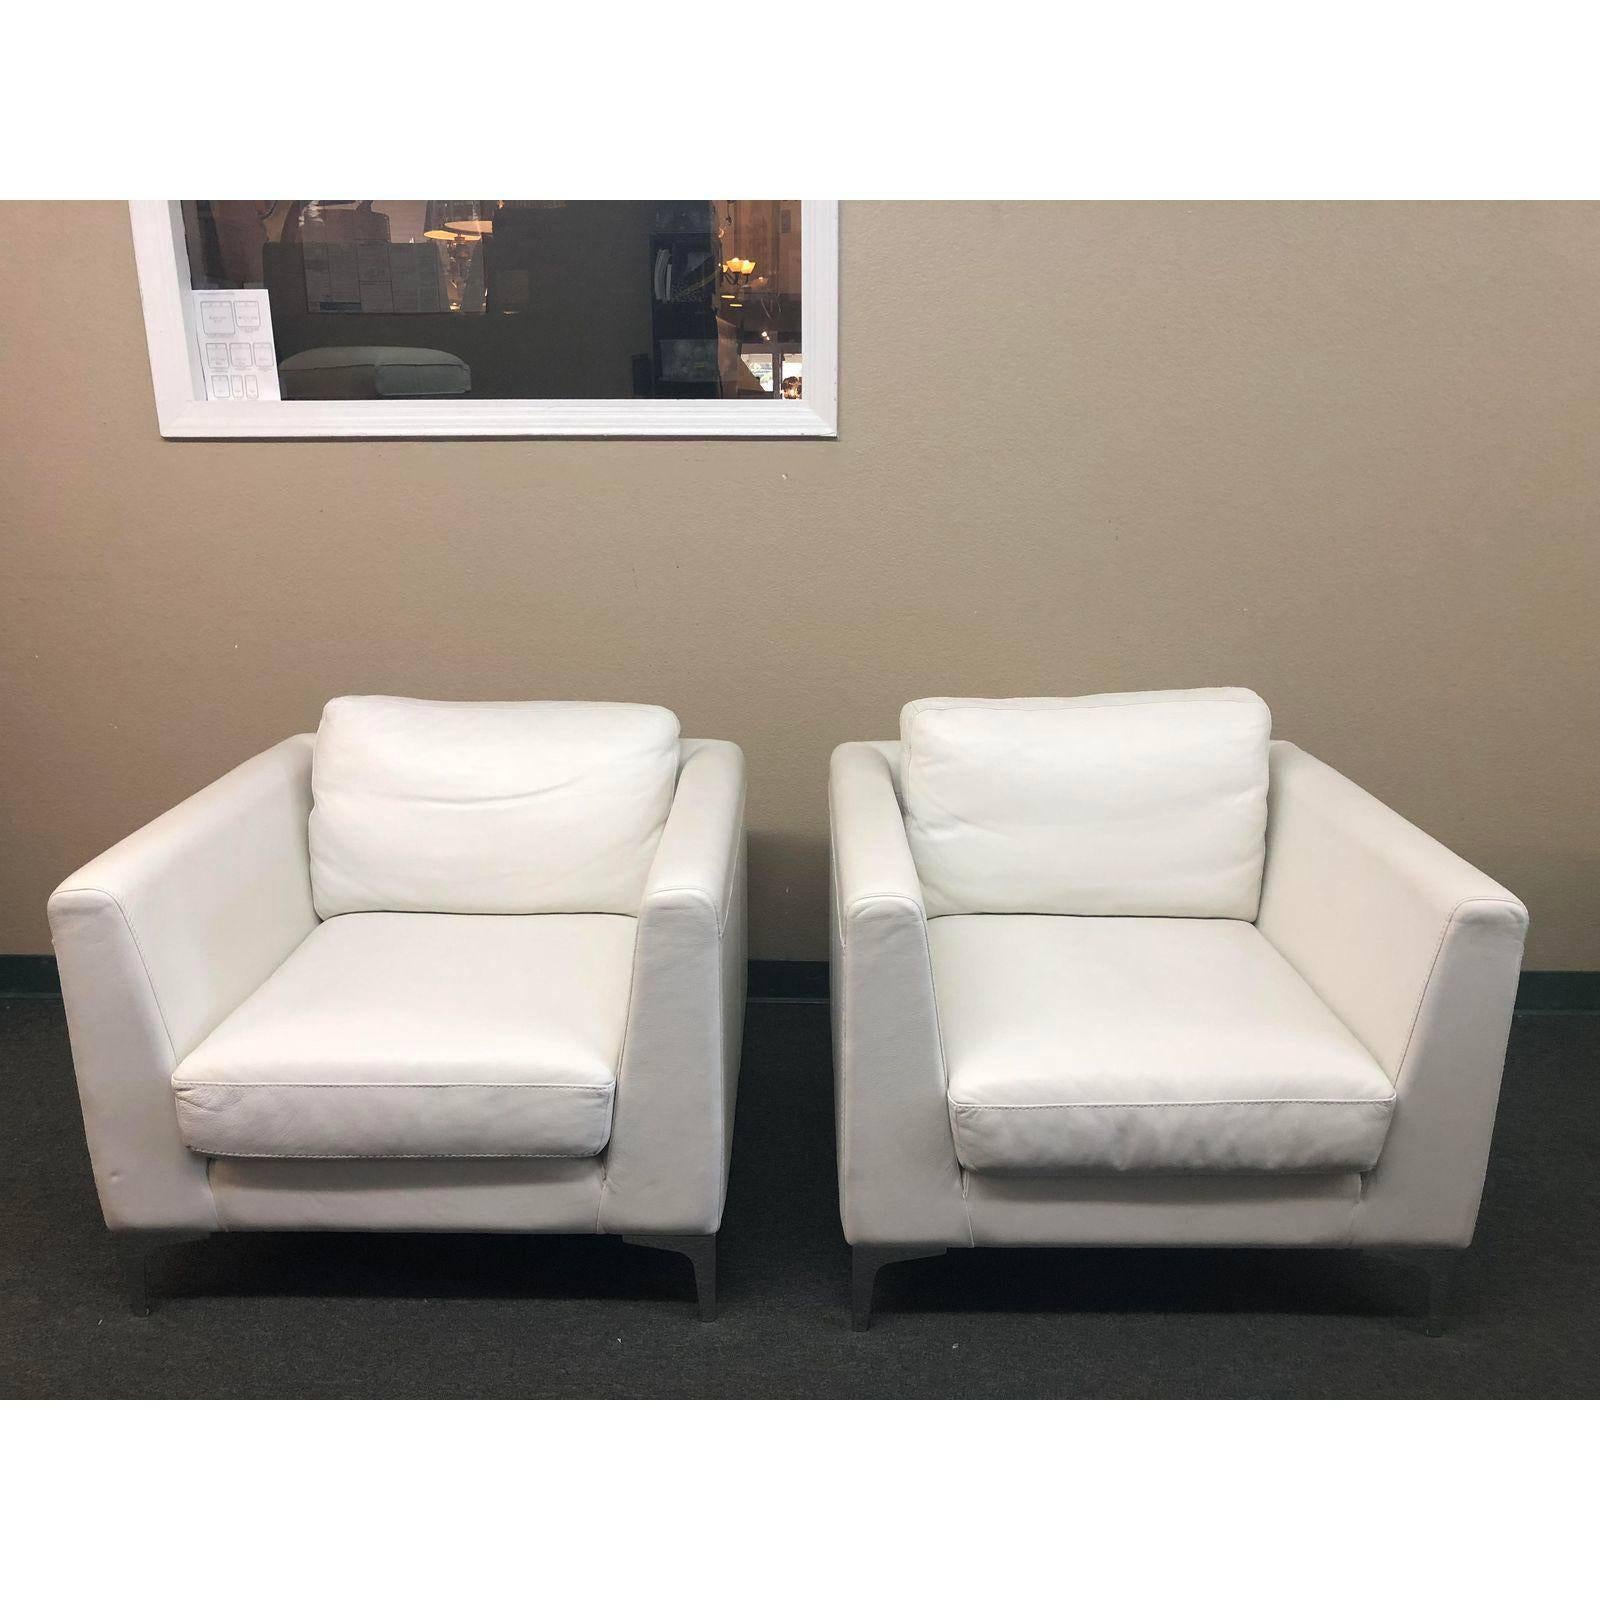 Pair of design within reach Albert arm white leather chairs. Manufactured by American leather for design within reach. The chairs sit on chromed metal legs. They are finished with top stitching detail. Measures: Arms height 26.5 inches, seat height